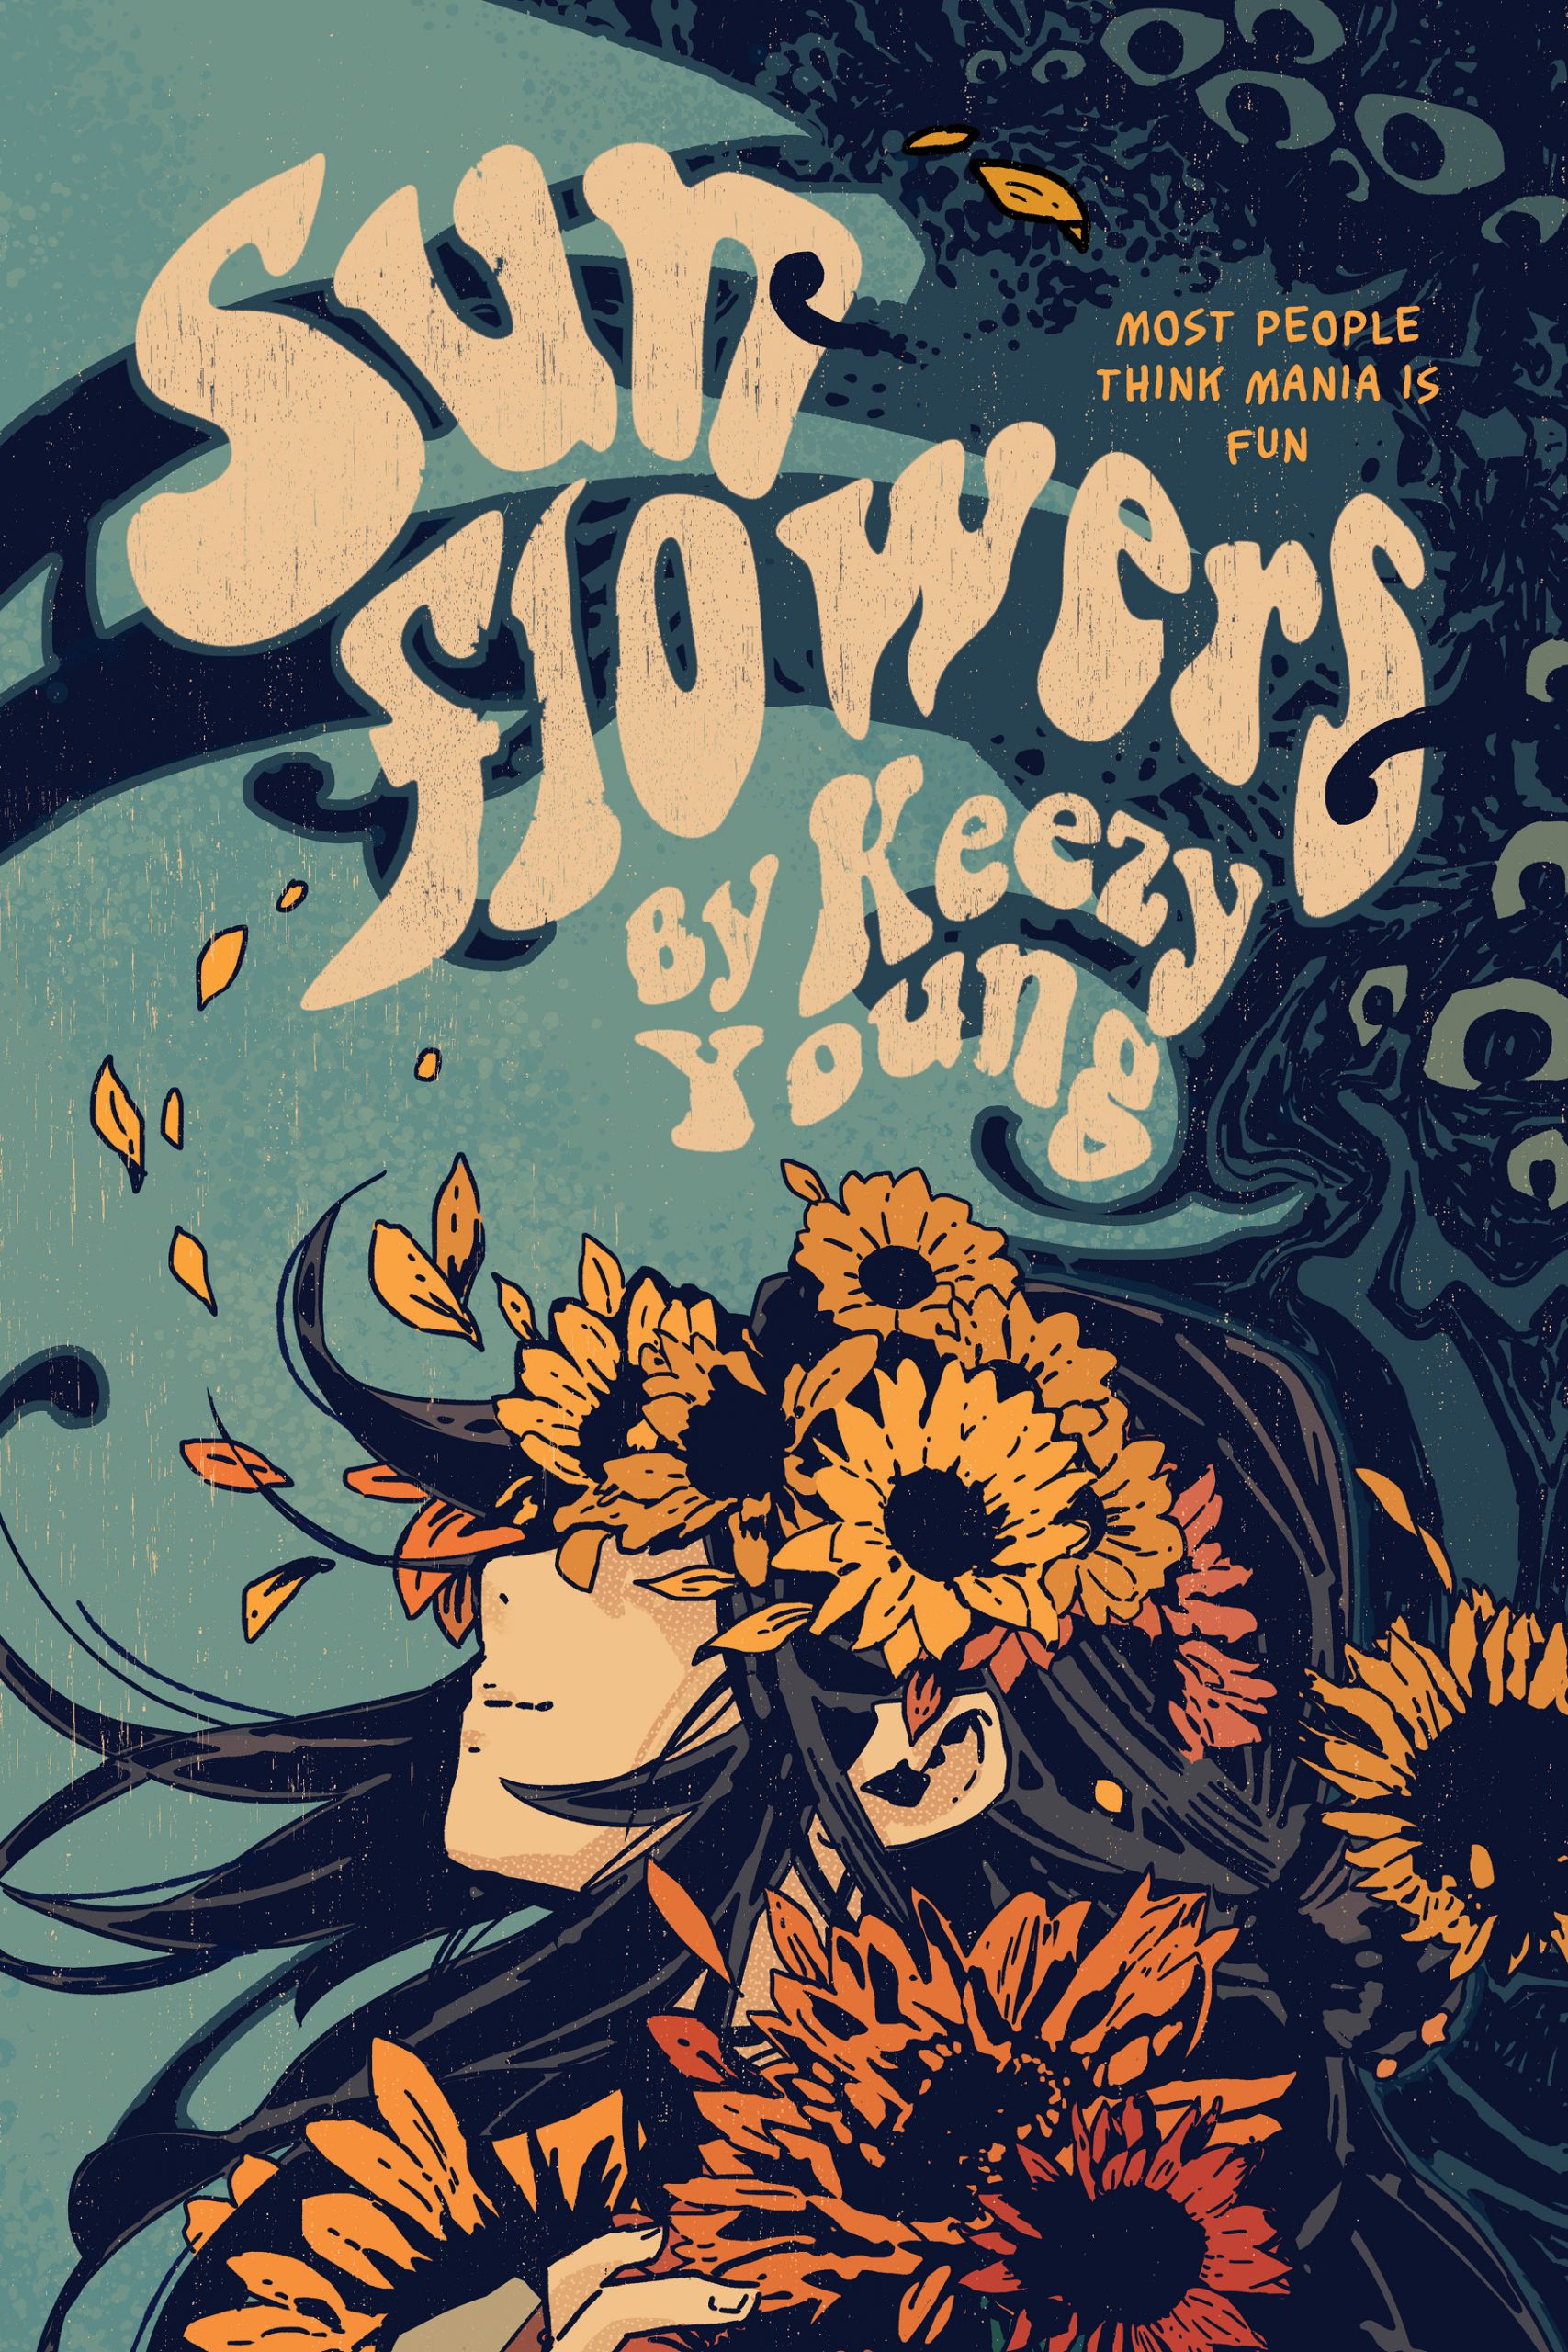 Against a teal background, a young person with long hair looks up at the sky with sunflowers all around them and covering their eyes. 